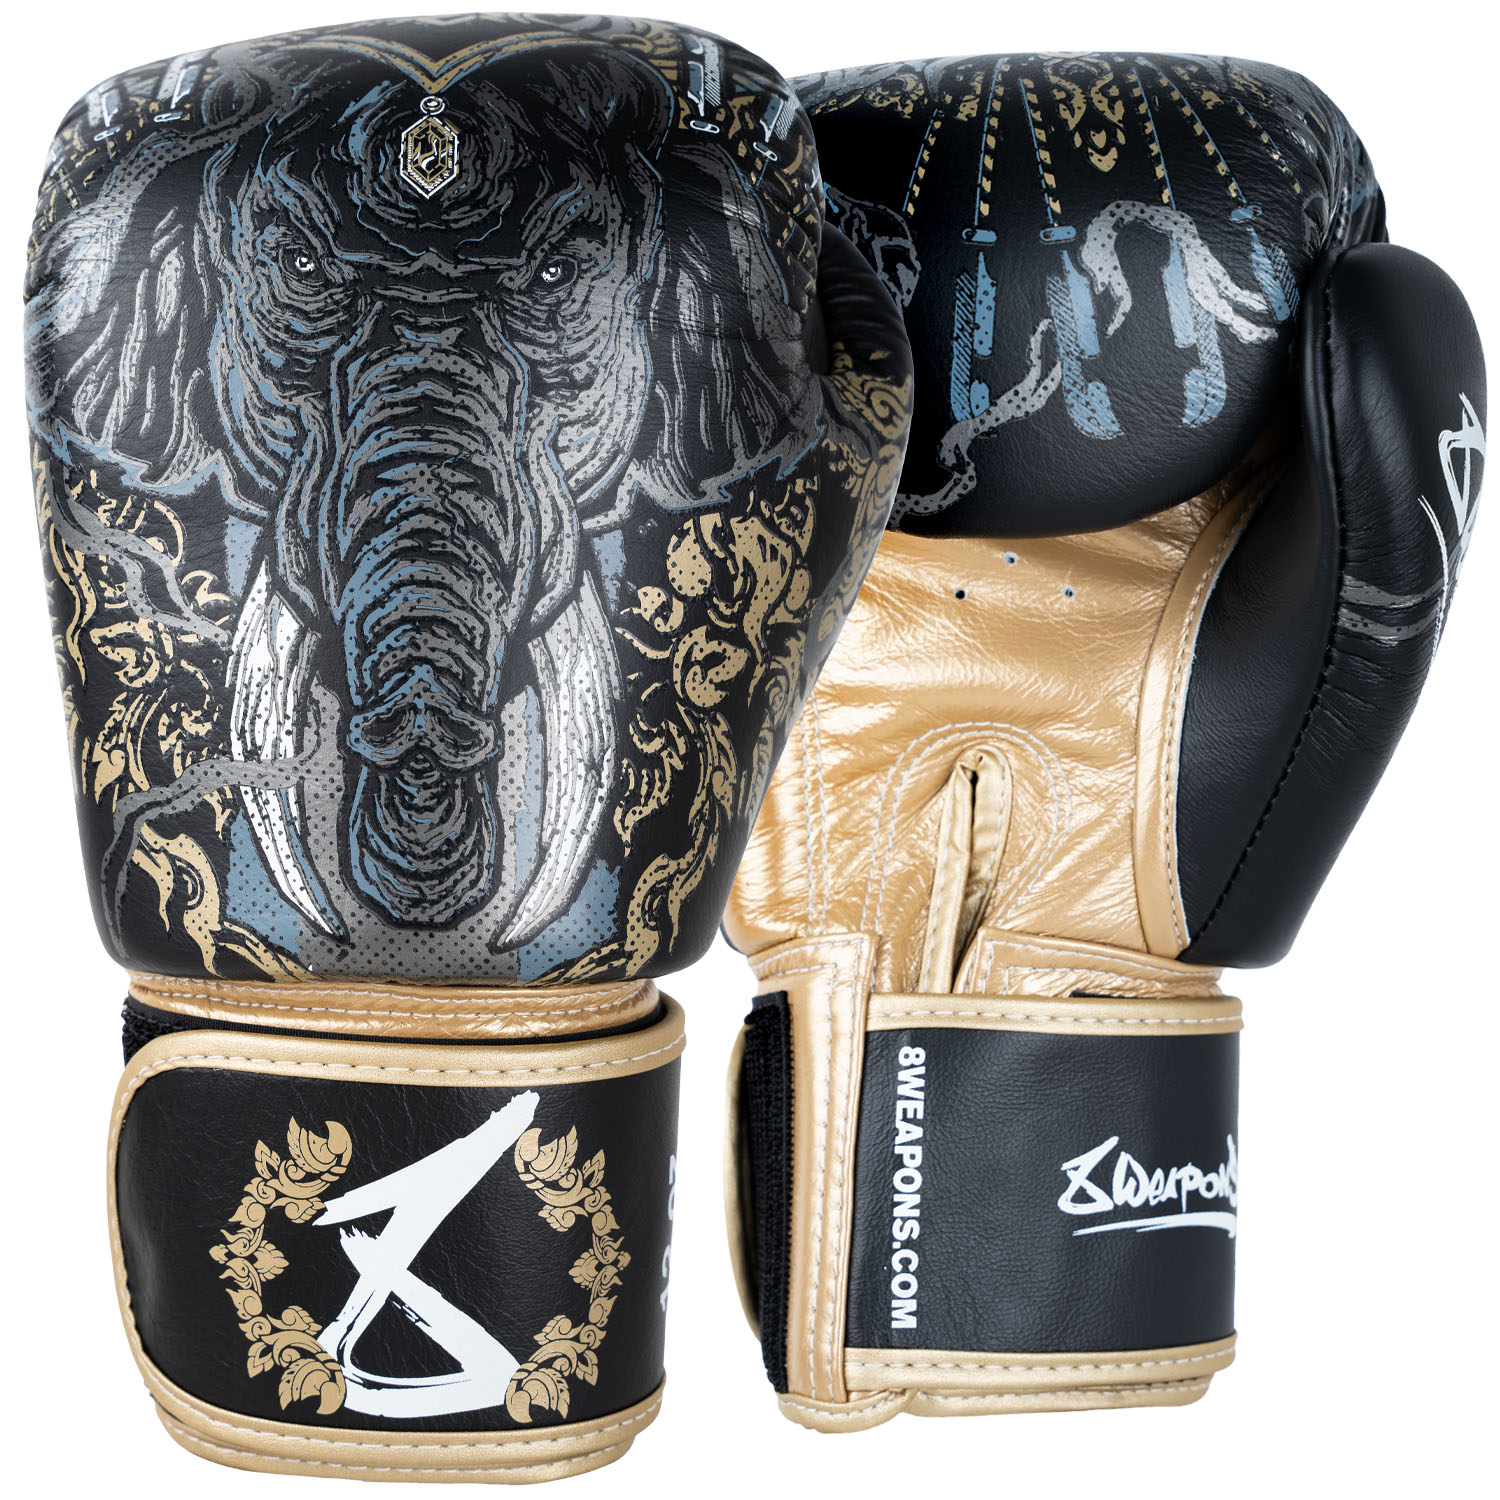 8 WEAPONS Boxing Gloves, Three Elephants 2.0, black-gold, 14 Oz